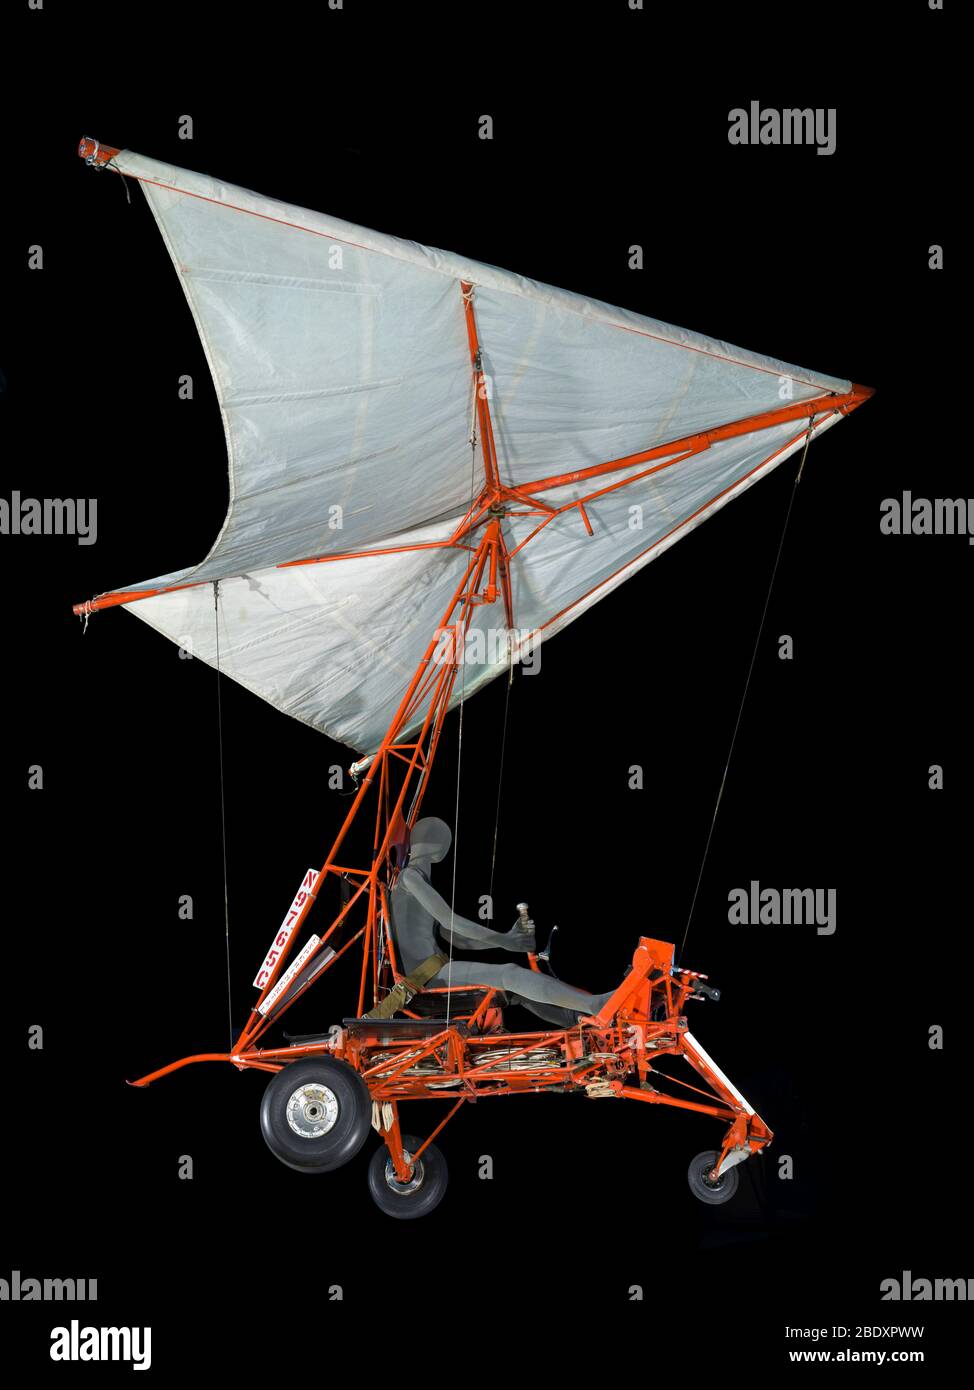 Gemini Paraglider Research Vehicle Stock Photo